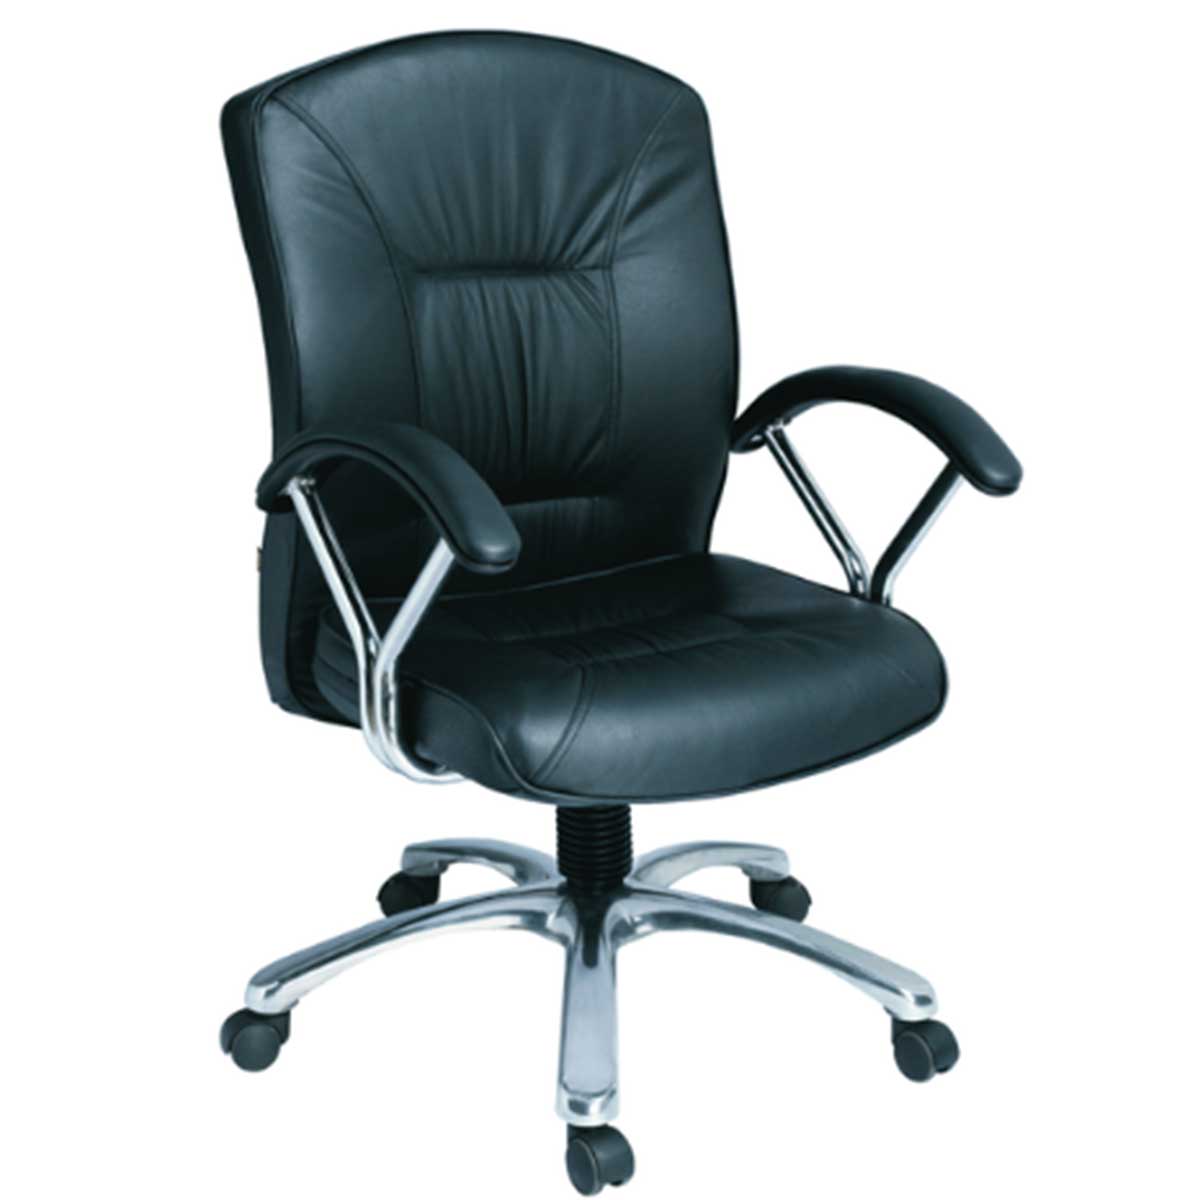 Godrej office chair Manufacturers, Suppliers in Honda Chowk